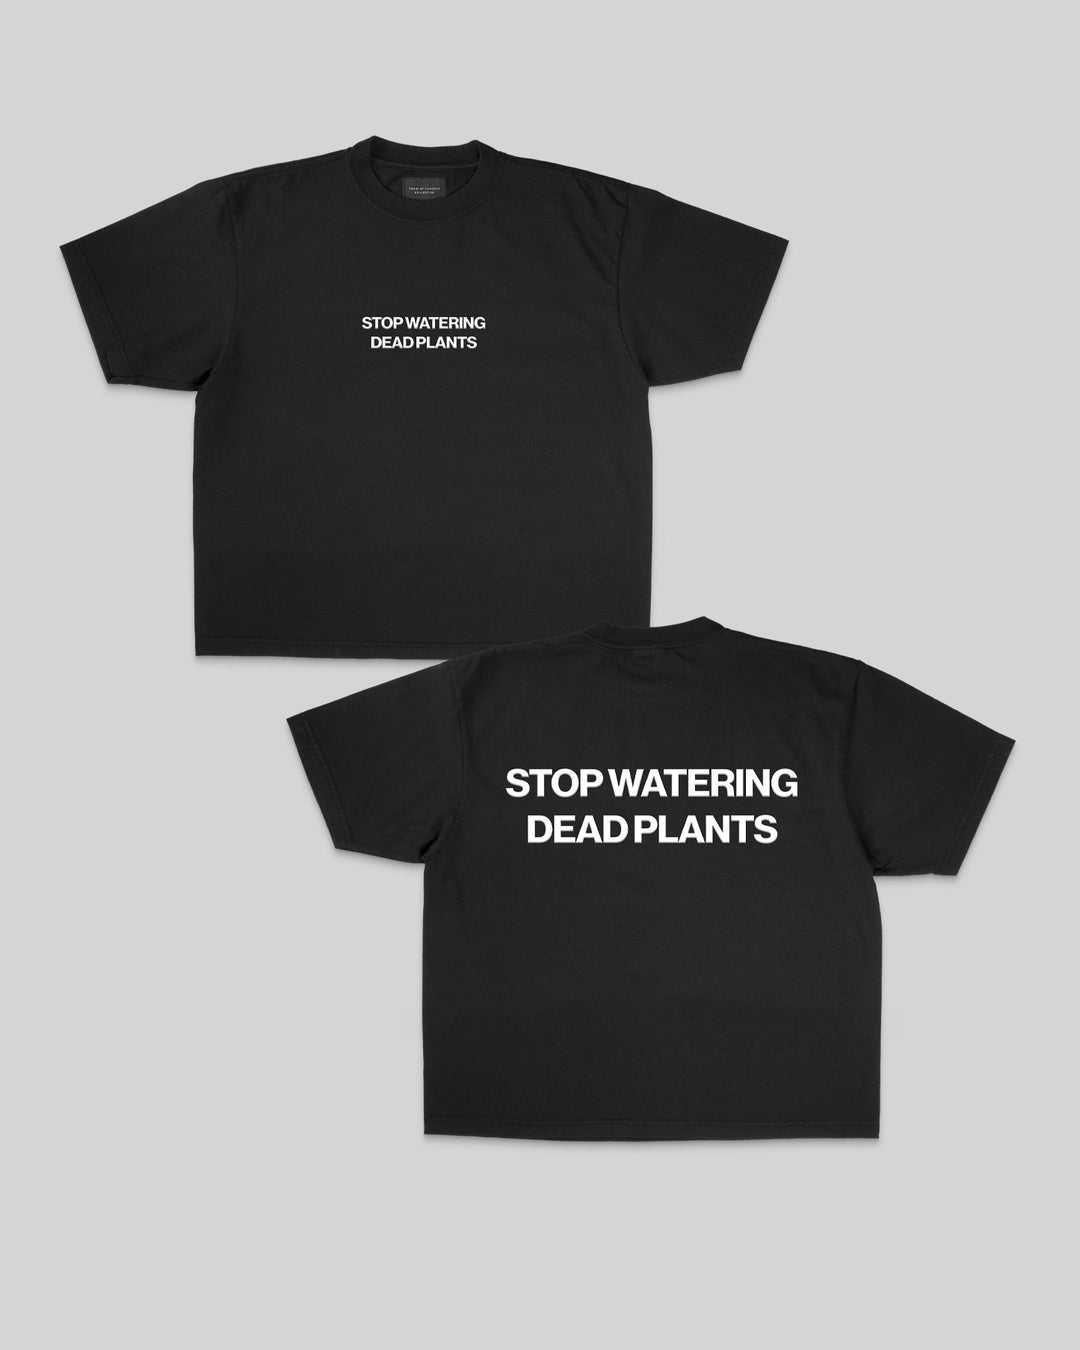 Stop Watering Dead Plants 2.0 Black Oversized Cropped Tee - trainofthoughtcollective